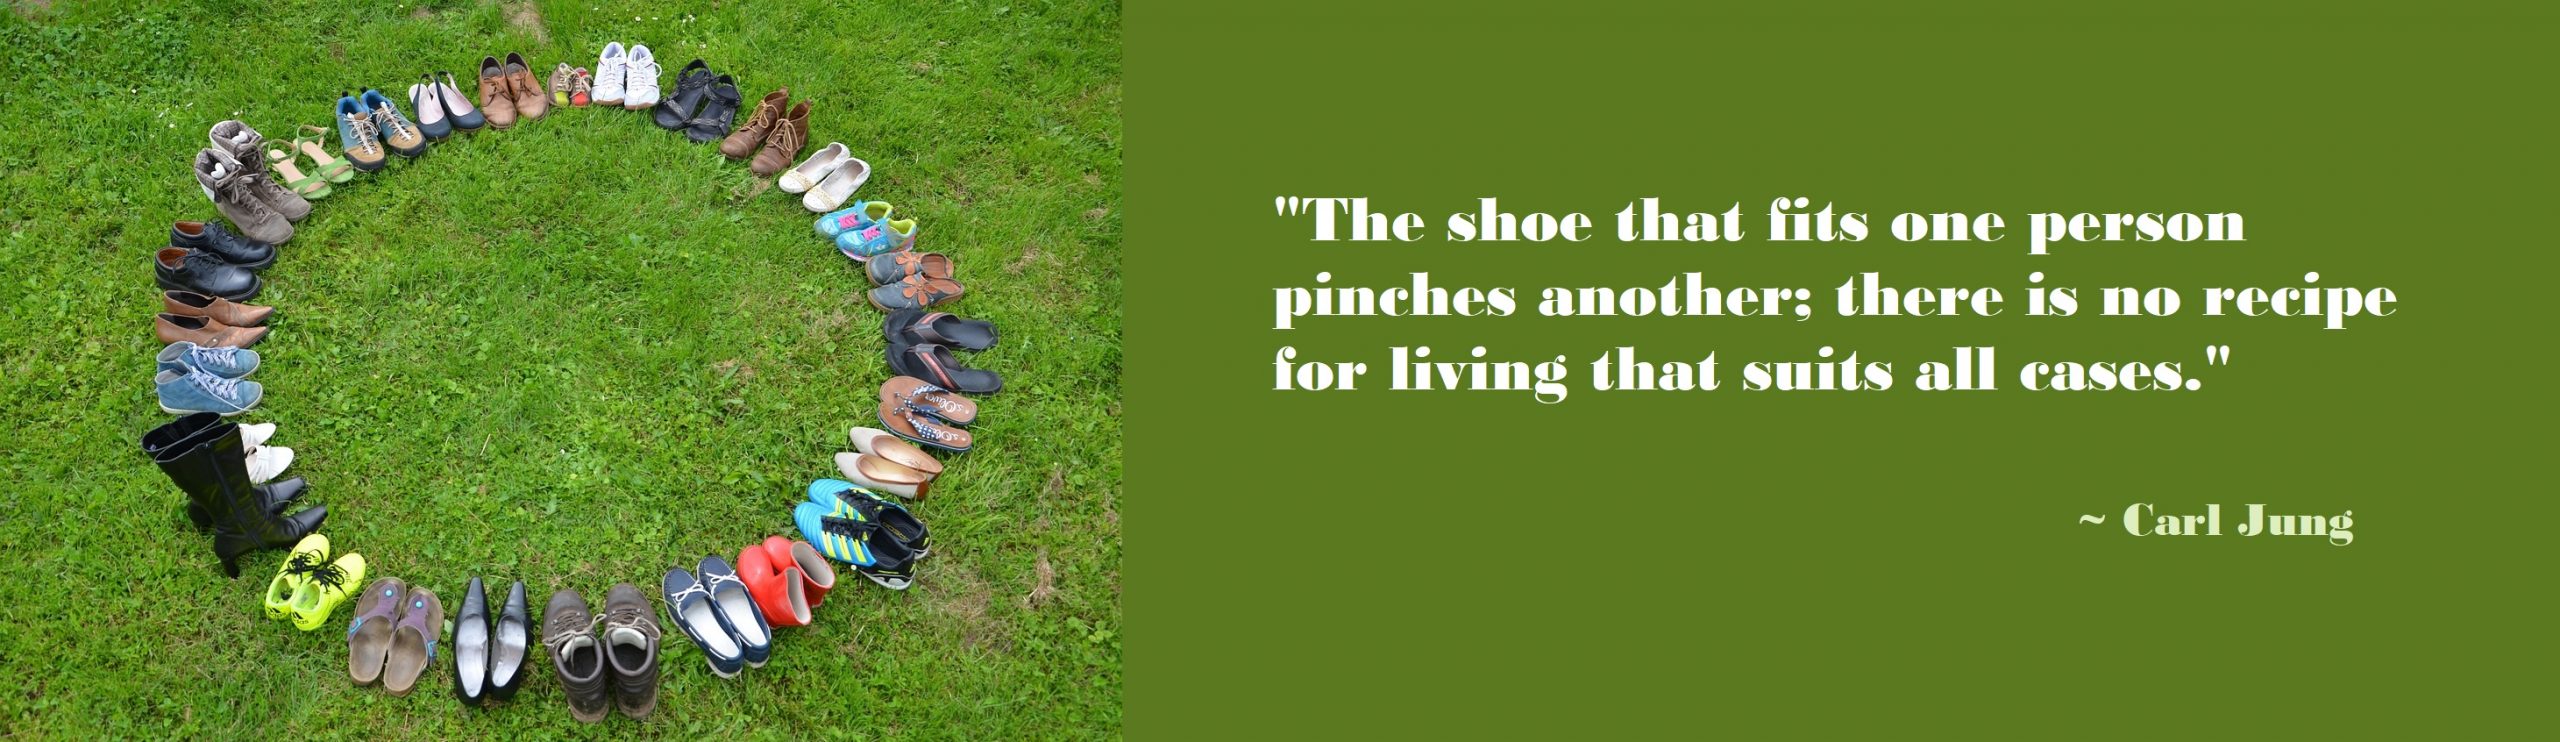 The shoe that fits one person pinches another; there is no recipe for living that suits all cases. Carl Jung